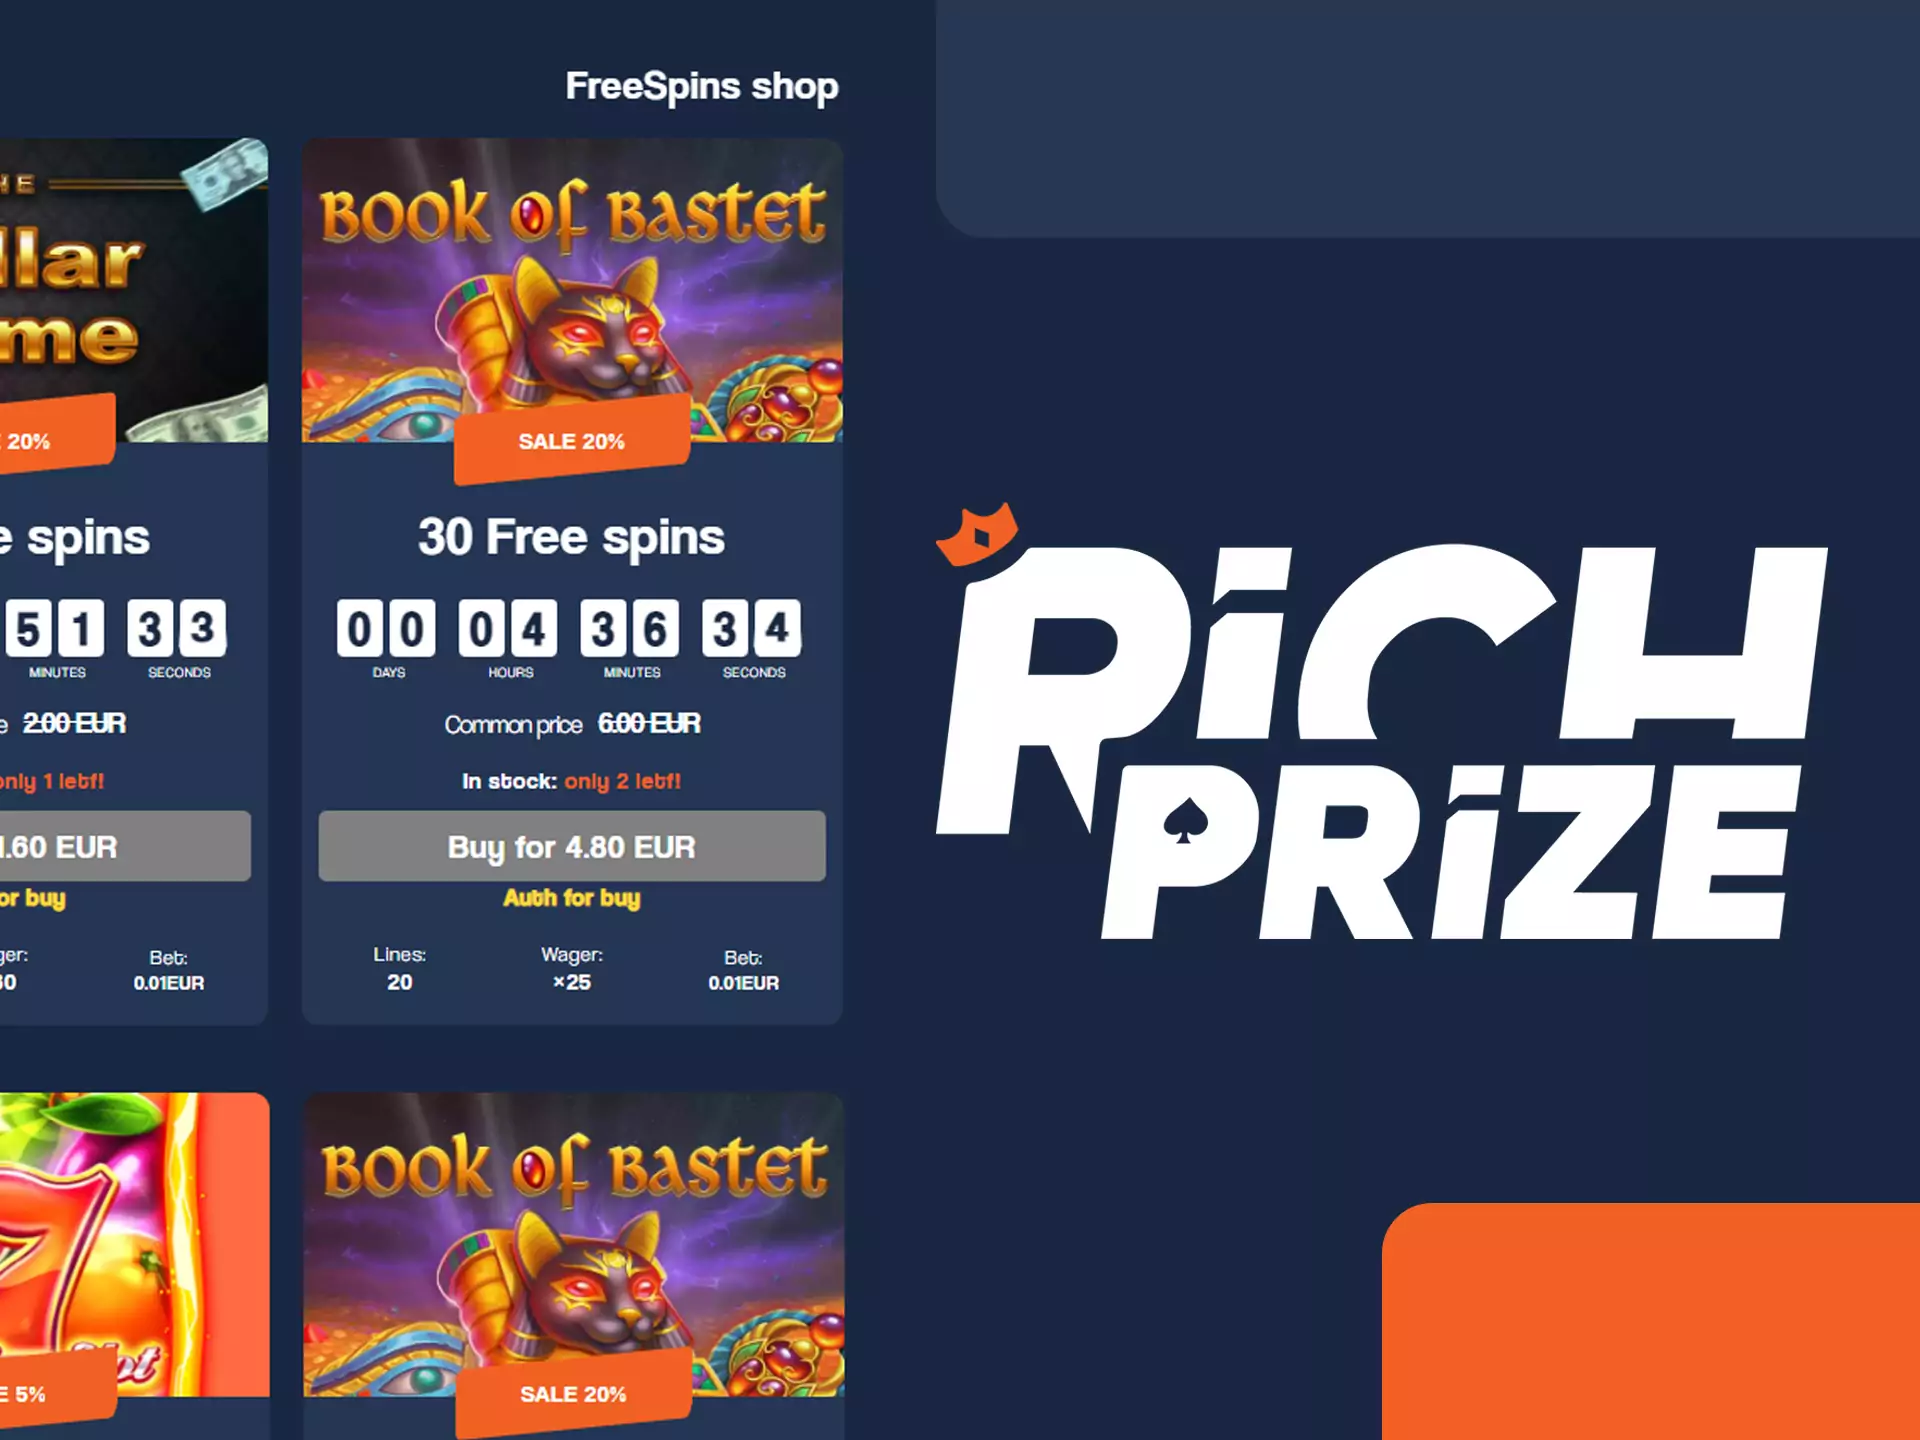 Check for big discounts on Richprize free spins.